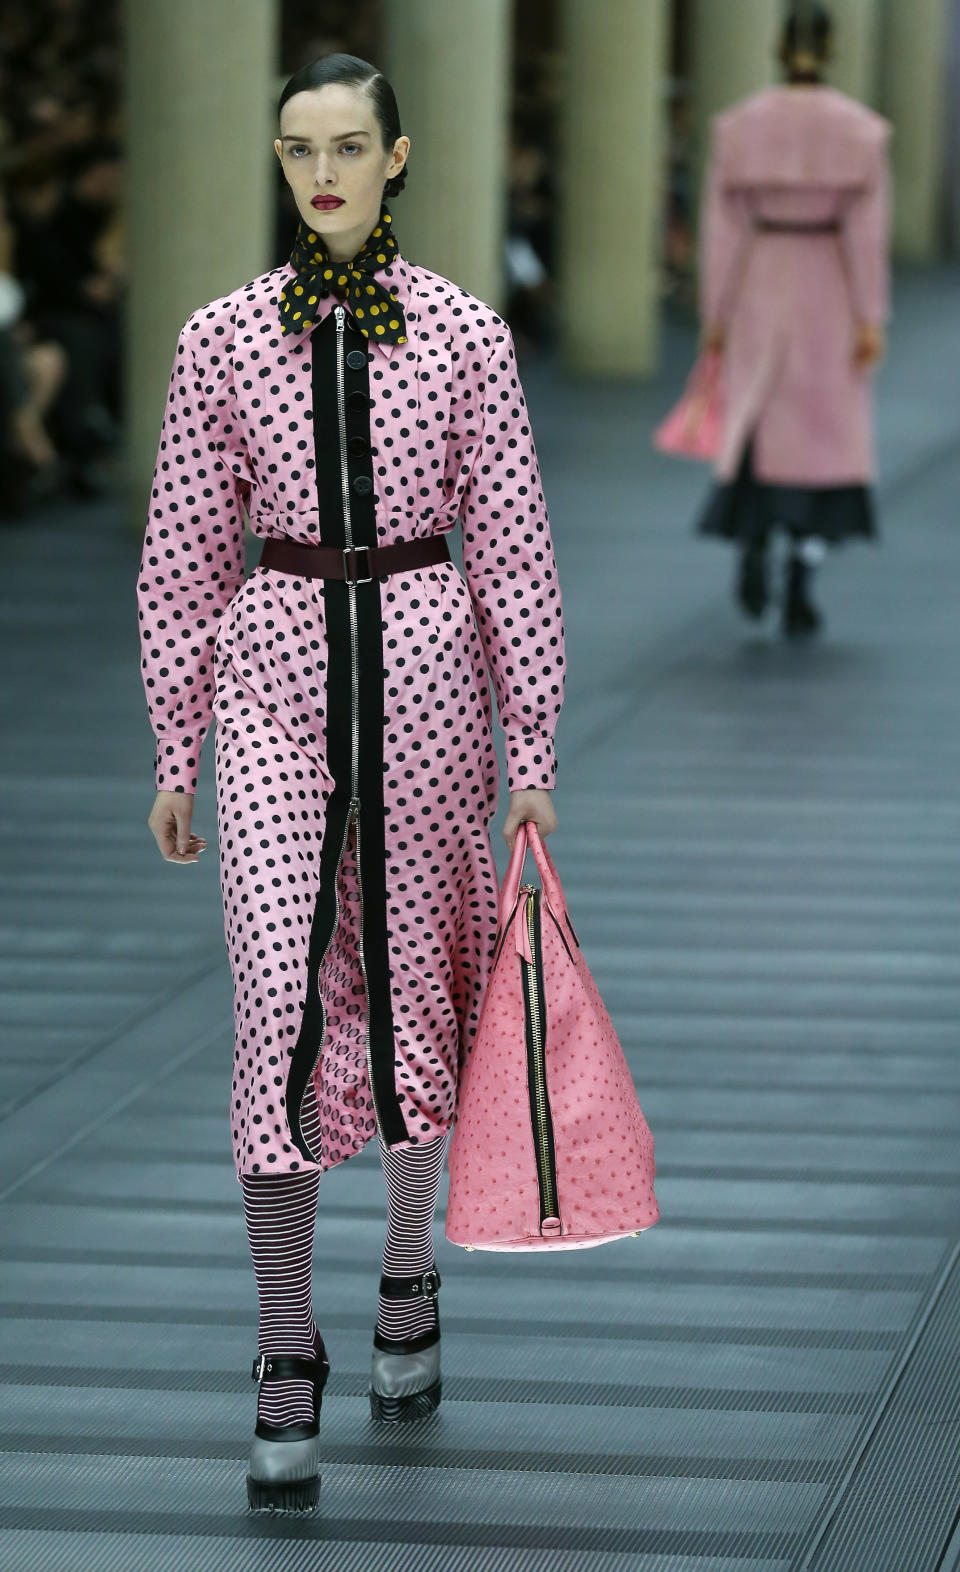 A model presents a creation for Miu Miu's Ready to Wear's Fall-Winter 2013-2014 fashion collection, presented, Wednesday, March 6, 2013 in Paris. (AP Photo/Jacques Brinon)